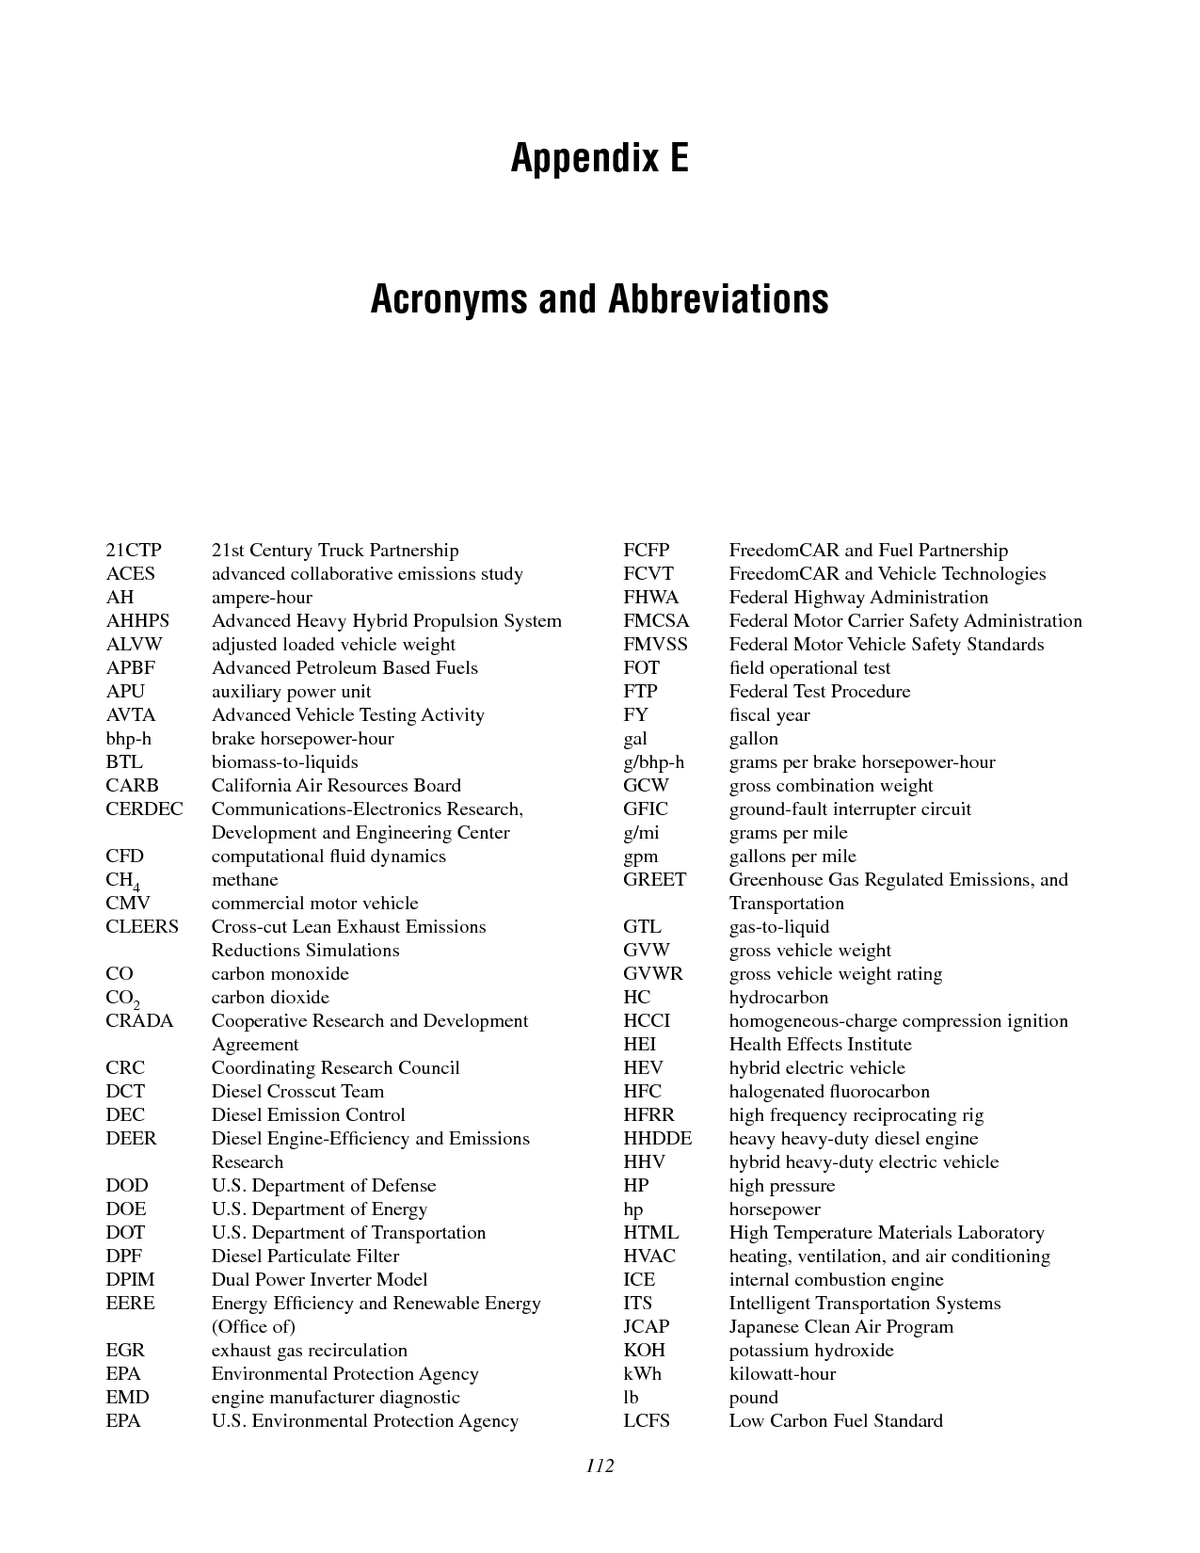 E Acronyms And Abbreviations Review Of The 21st Century Truck Partnership The National Academies Press